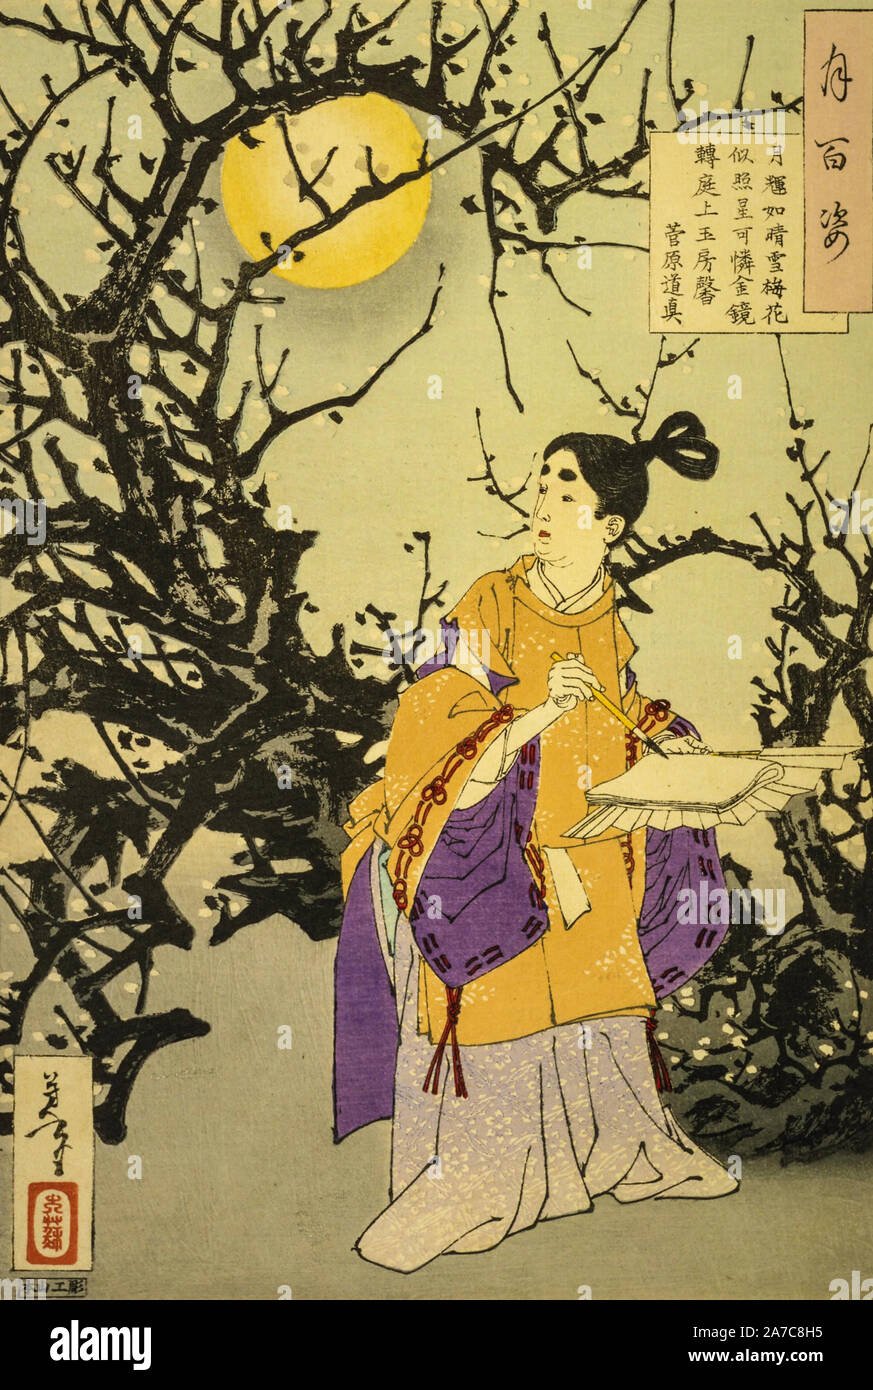 Haiku: The Moon Glimmers like Bright Snow/ And Plum Blossoms Appear like Reflected Stars/ Ah! The Golden Mirror of the Moon Passes Overhead/ As Fragrance from the Jade Chamber Fills the Garden - Sugawara no Michizane, woodblock prints by Tsukioka Yoshitoshi. Stock Photo